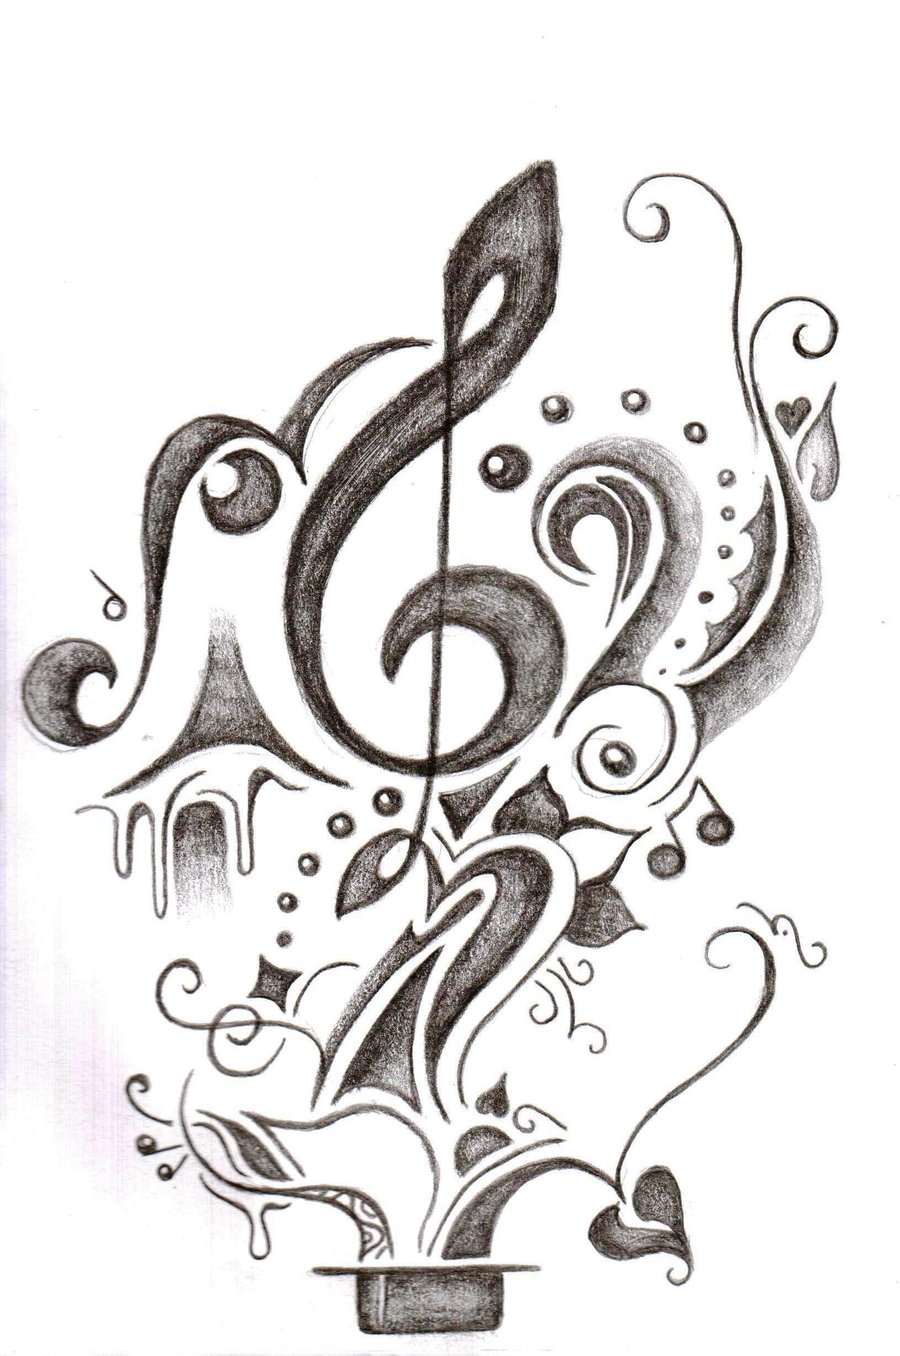 Music Tattoos Designs, Ideas and Meaning | Tattoos For You